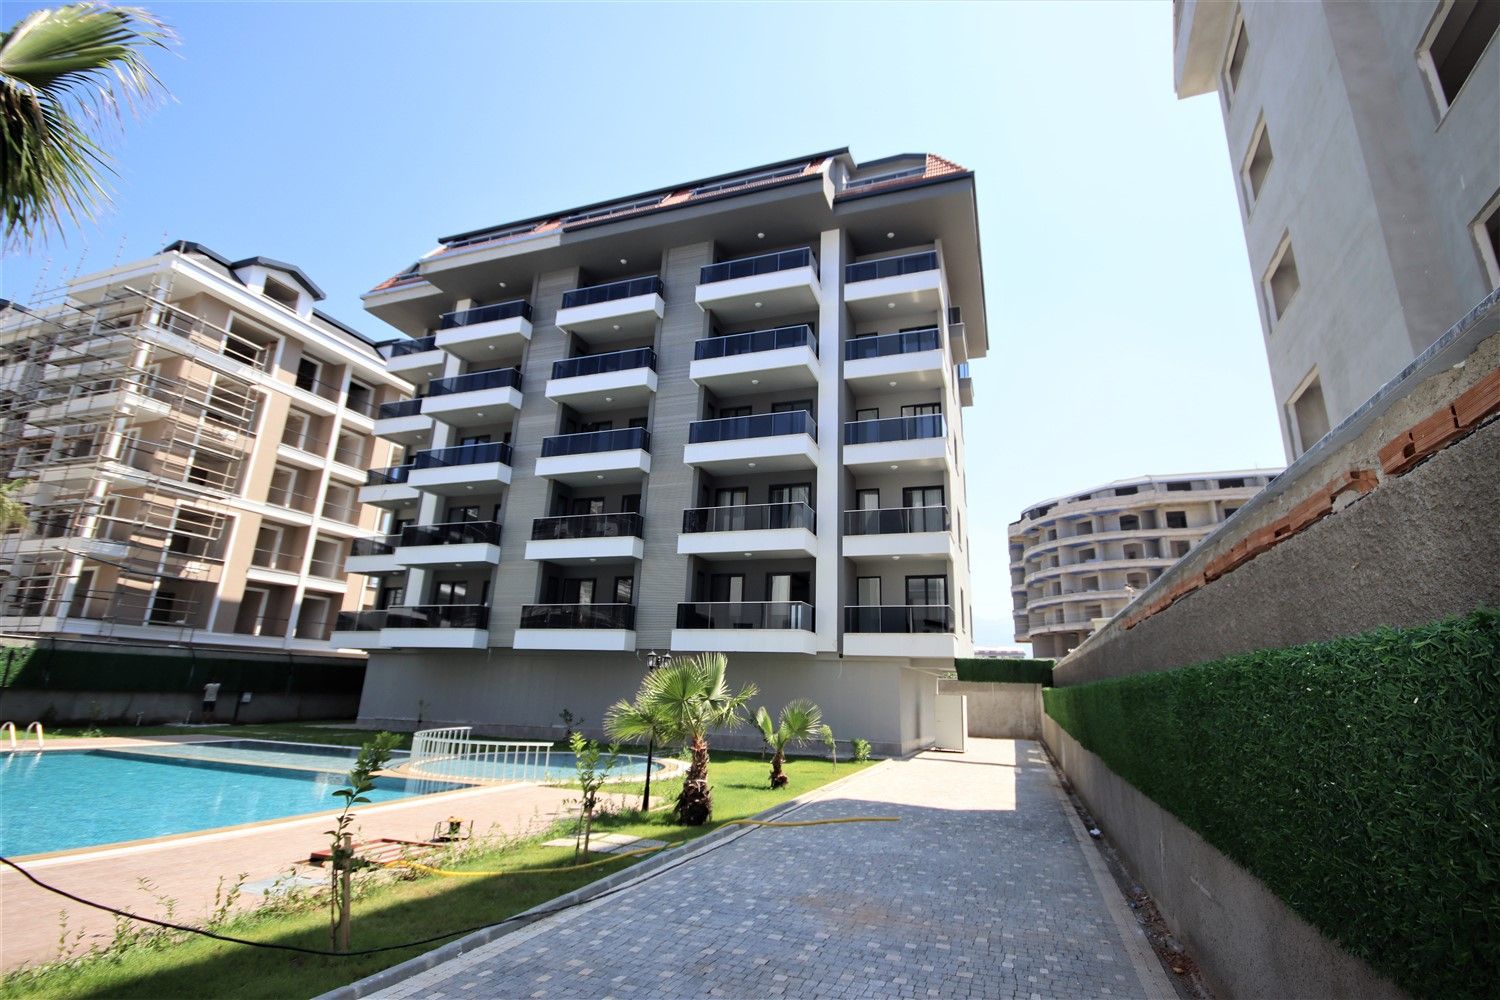 New apartments in 100 m from the sea - Kargıcak district, Alanya